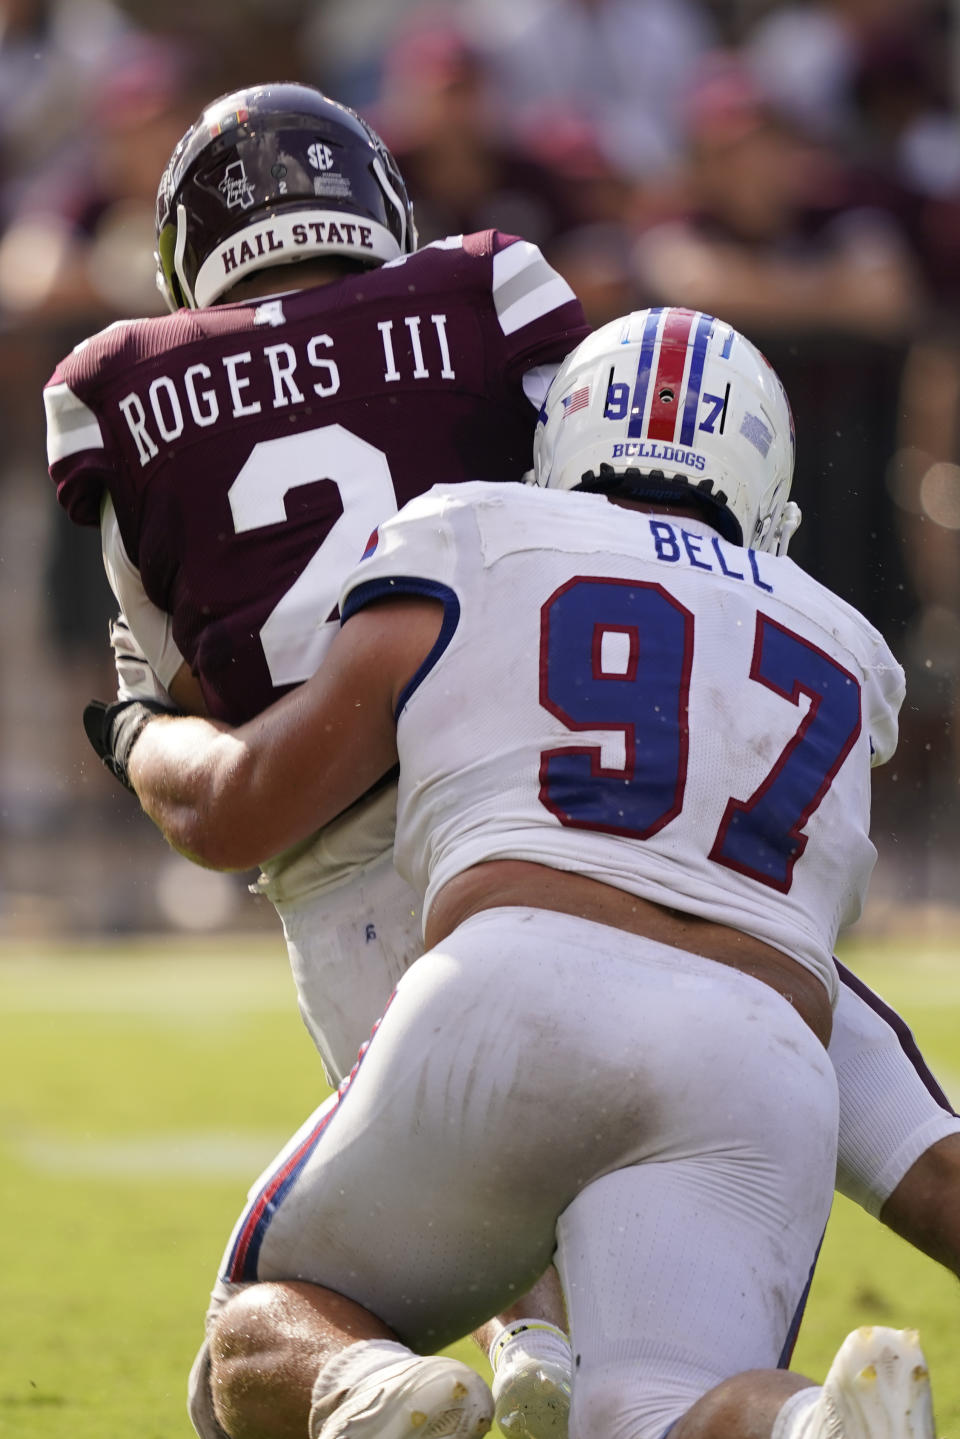 Mississippi State quarterback Will Rogers (2) is sacked by Louisiana Tech defensive lineman Levi Bell (97) during the first half of an NCAA college football game in Starkville, Miss., Saturday, Sept. 4, 2021. (AP Photo/Rogelio V. Solis)